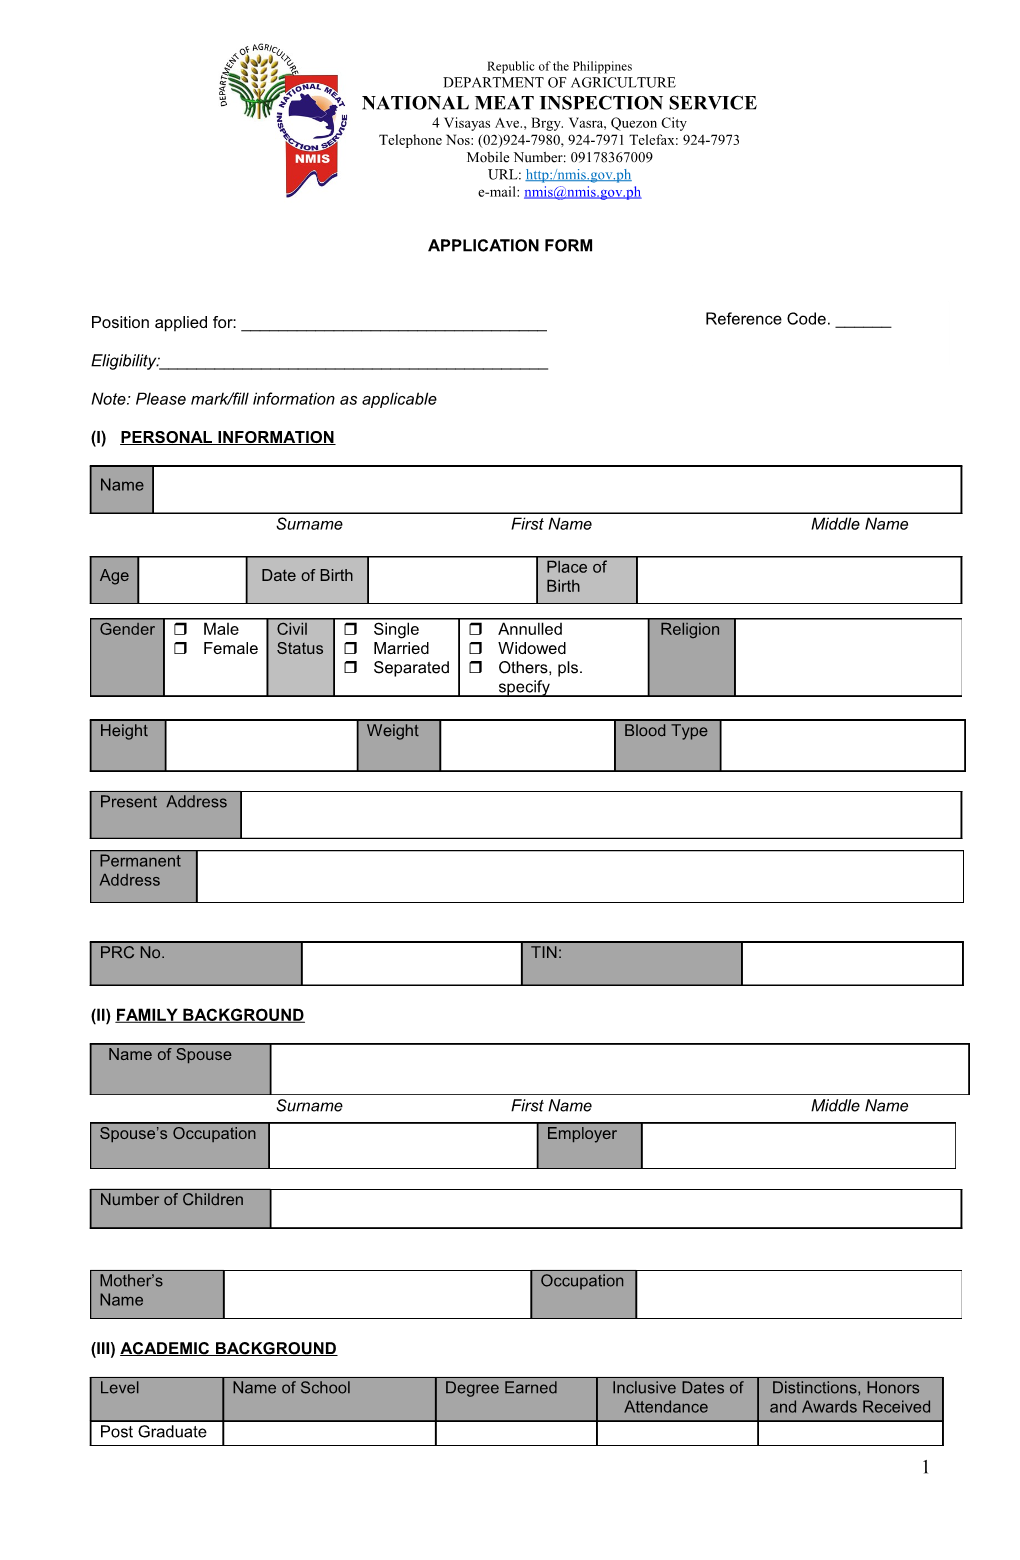 Application Form s84